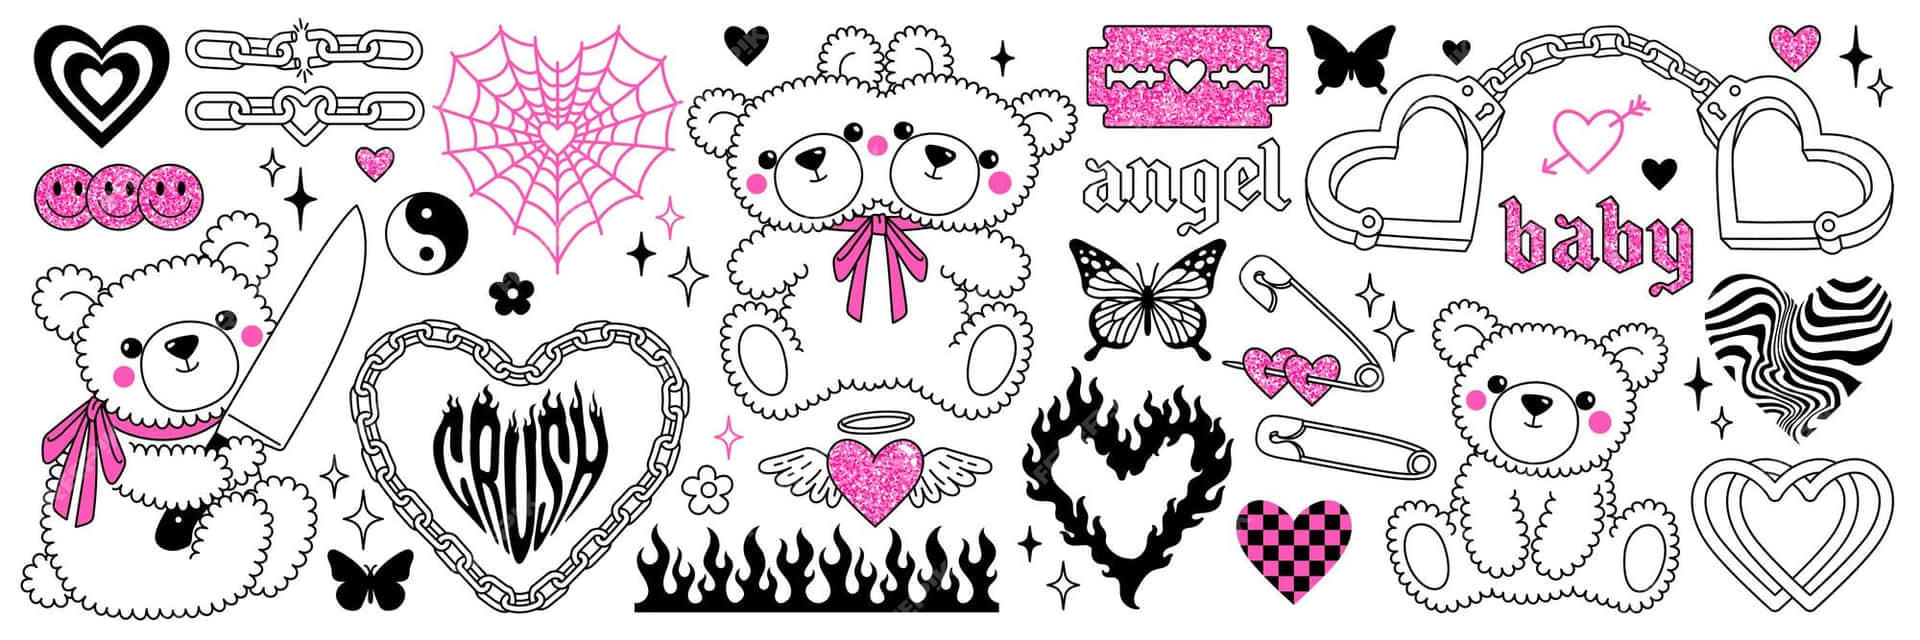 Pink Goth Aesthetic Sticker Collection Wallpaper